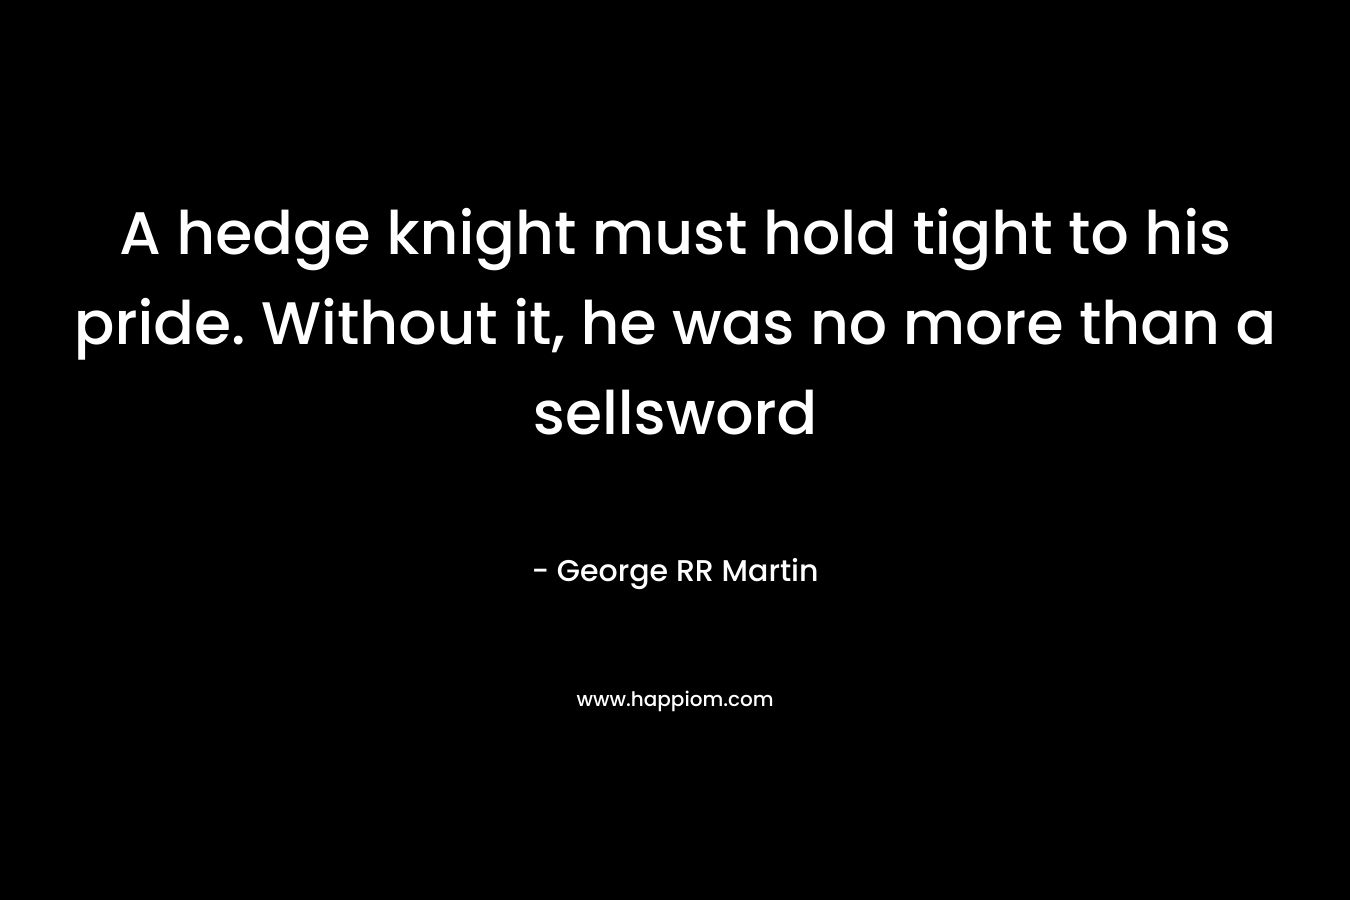 A hedge knight must hold tight to his pride. Without it, he was no more than a sellsword – George RR Martin